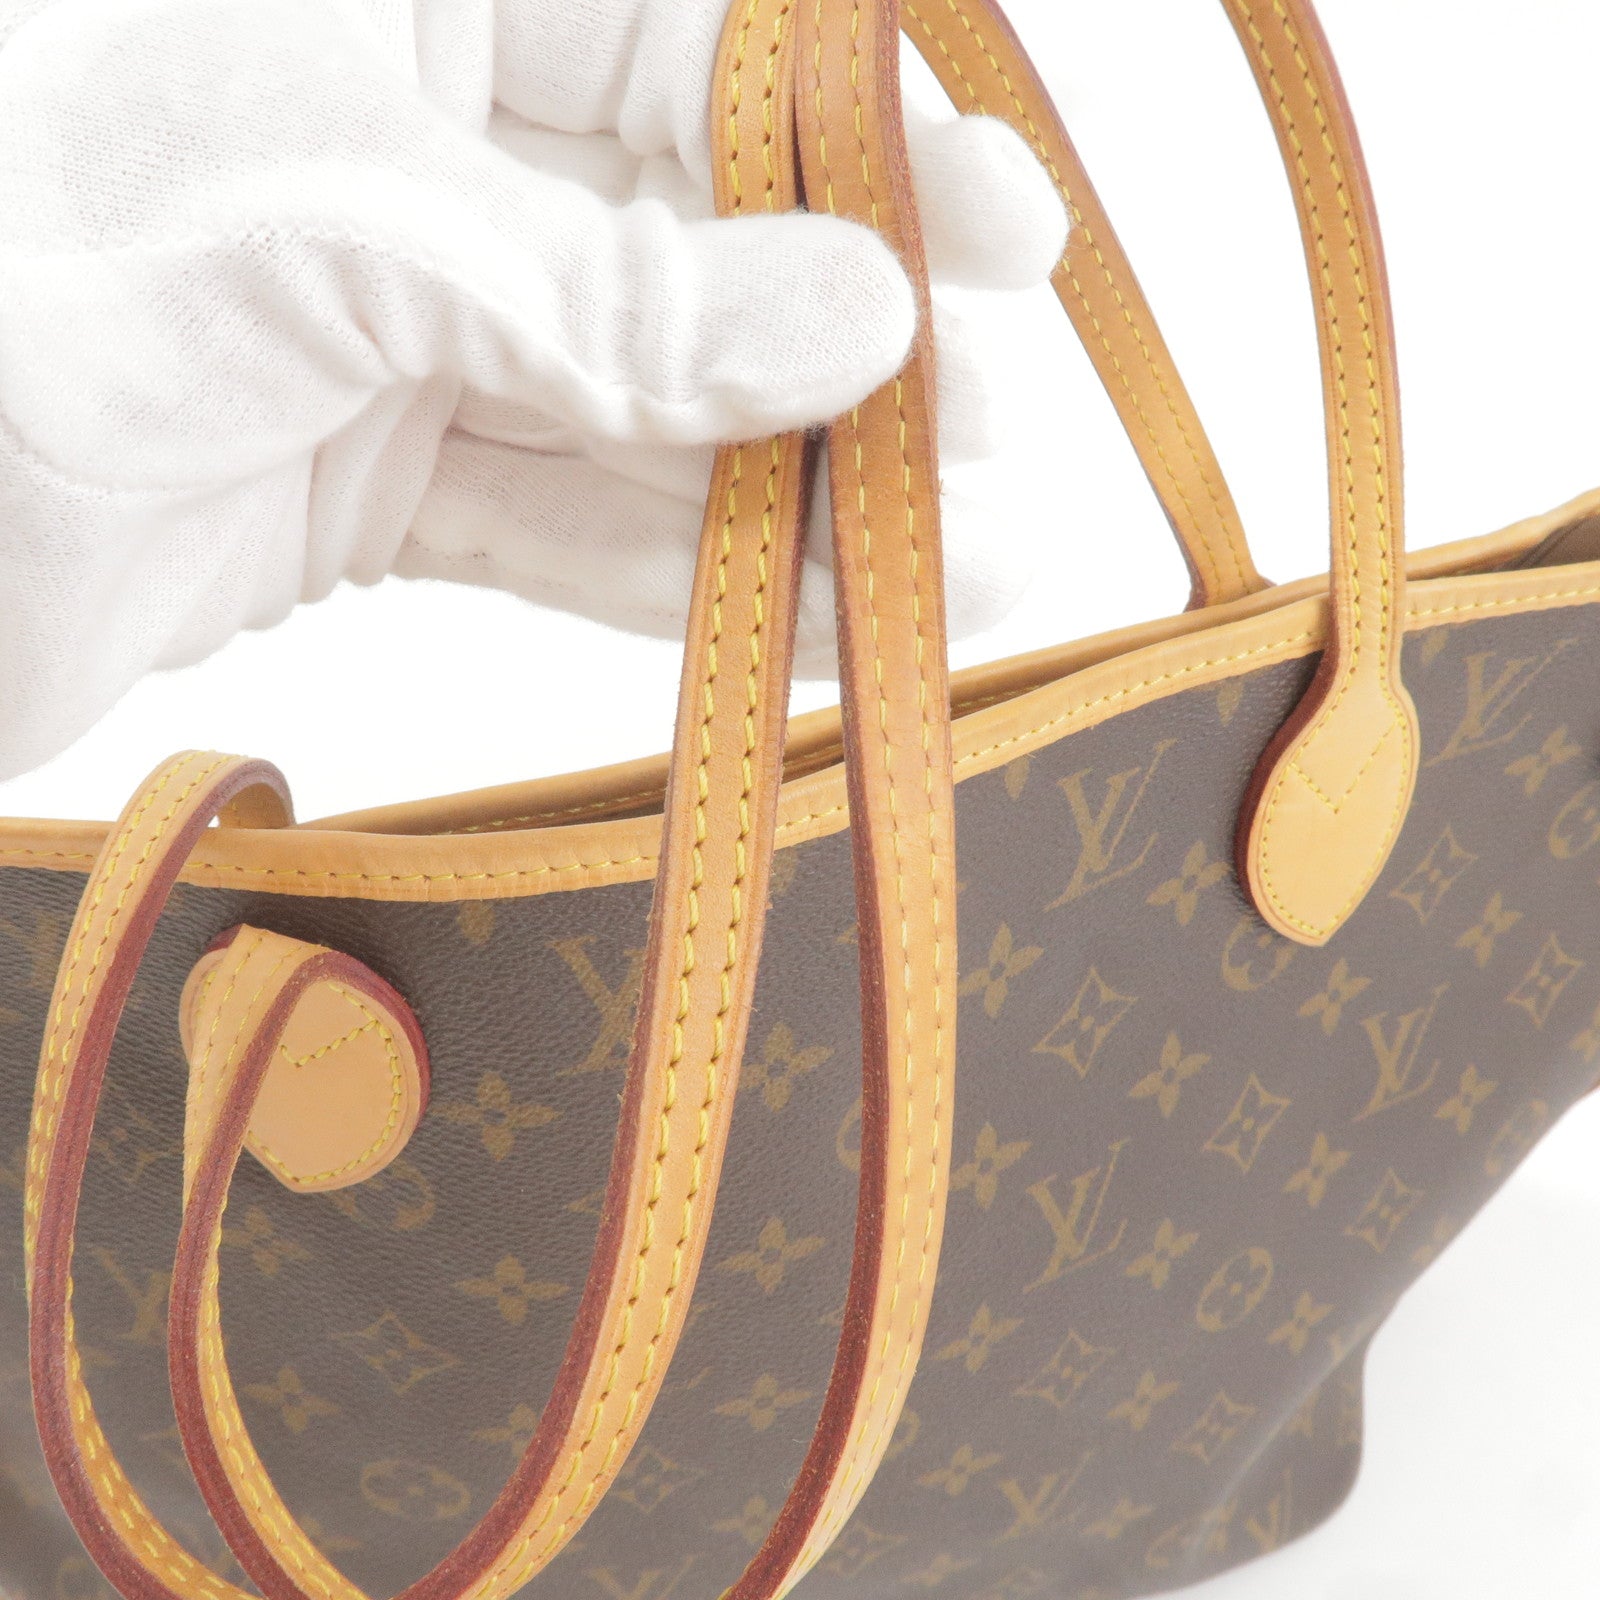 LUXURY ITEM REVIEW - Louis Vuitton Neverfull MM Empreinte Leather 